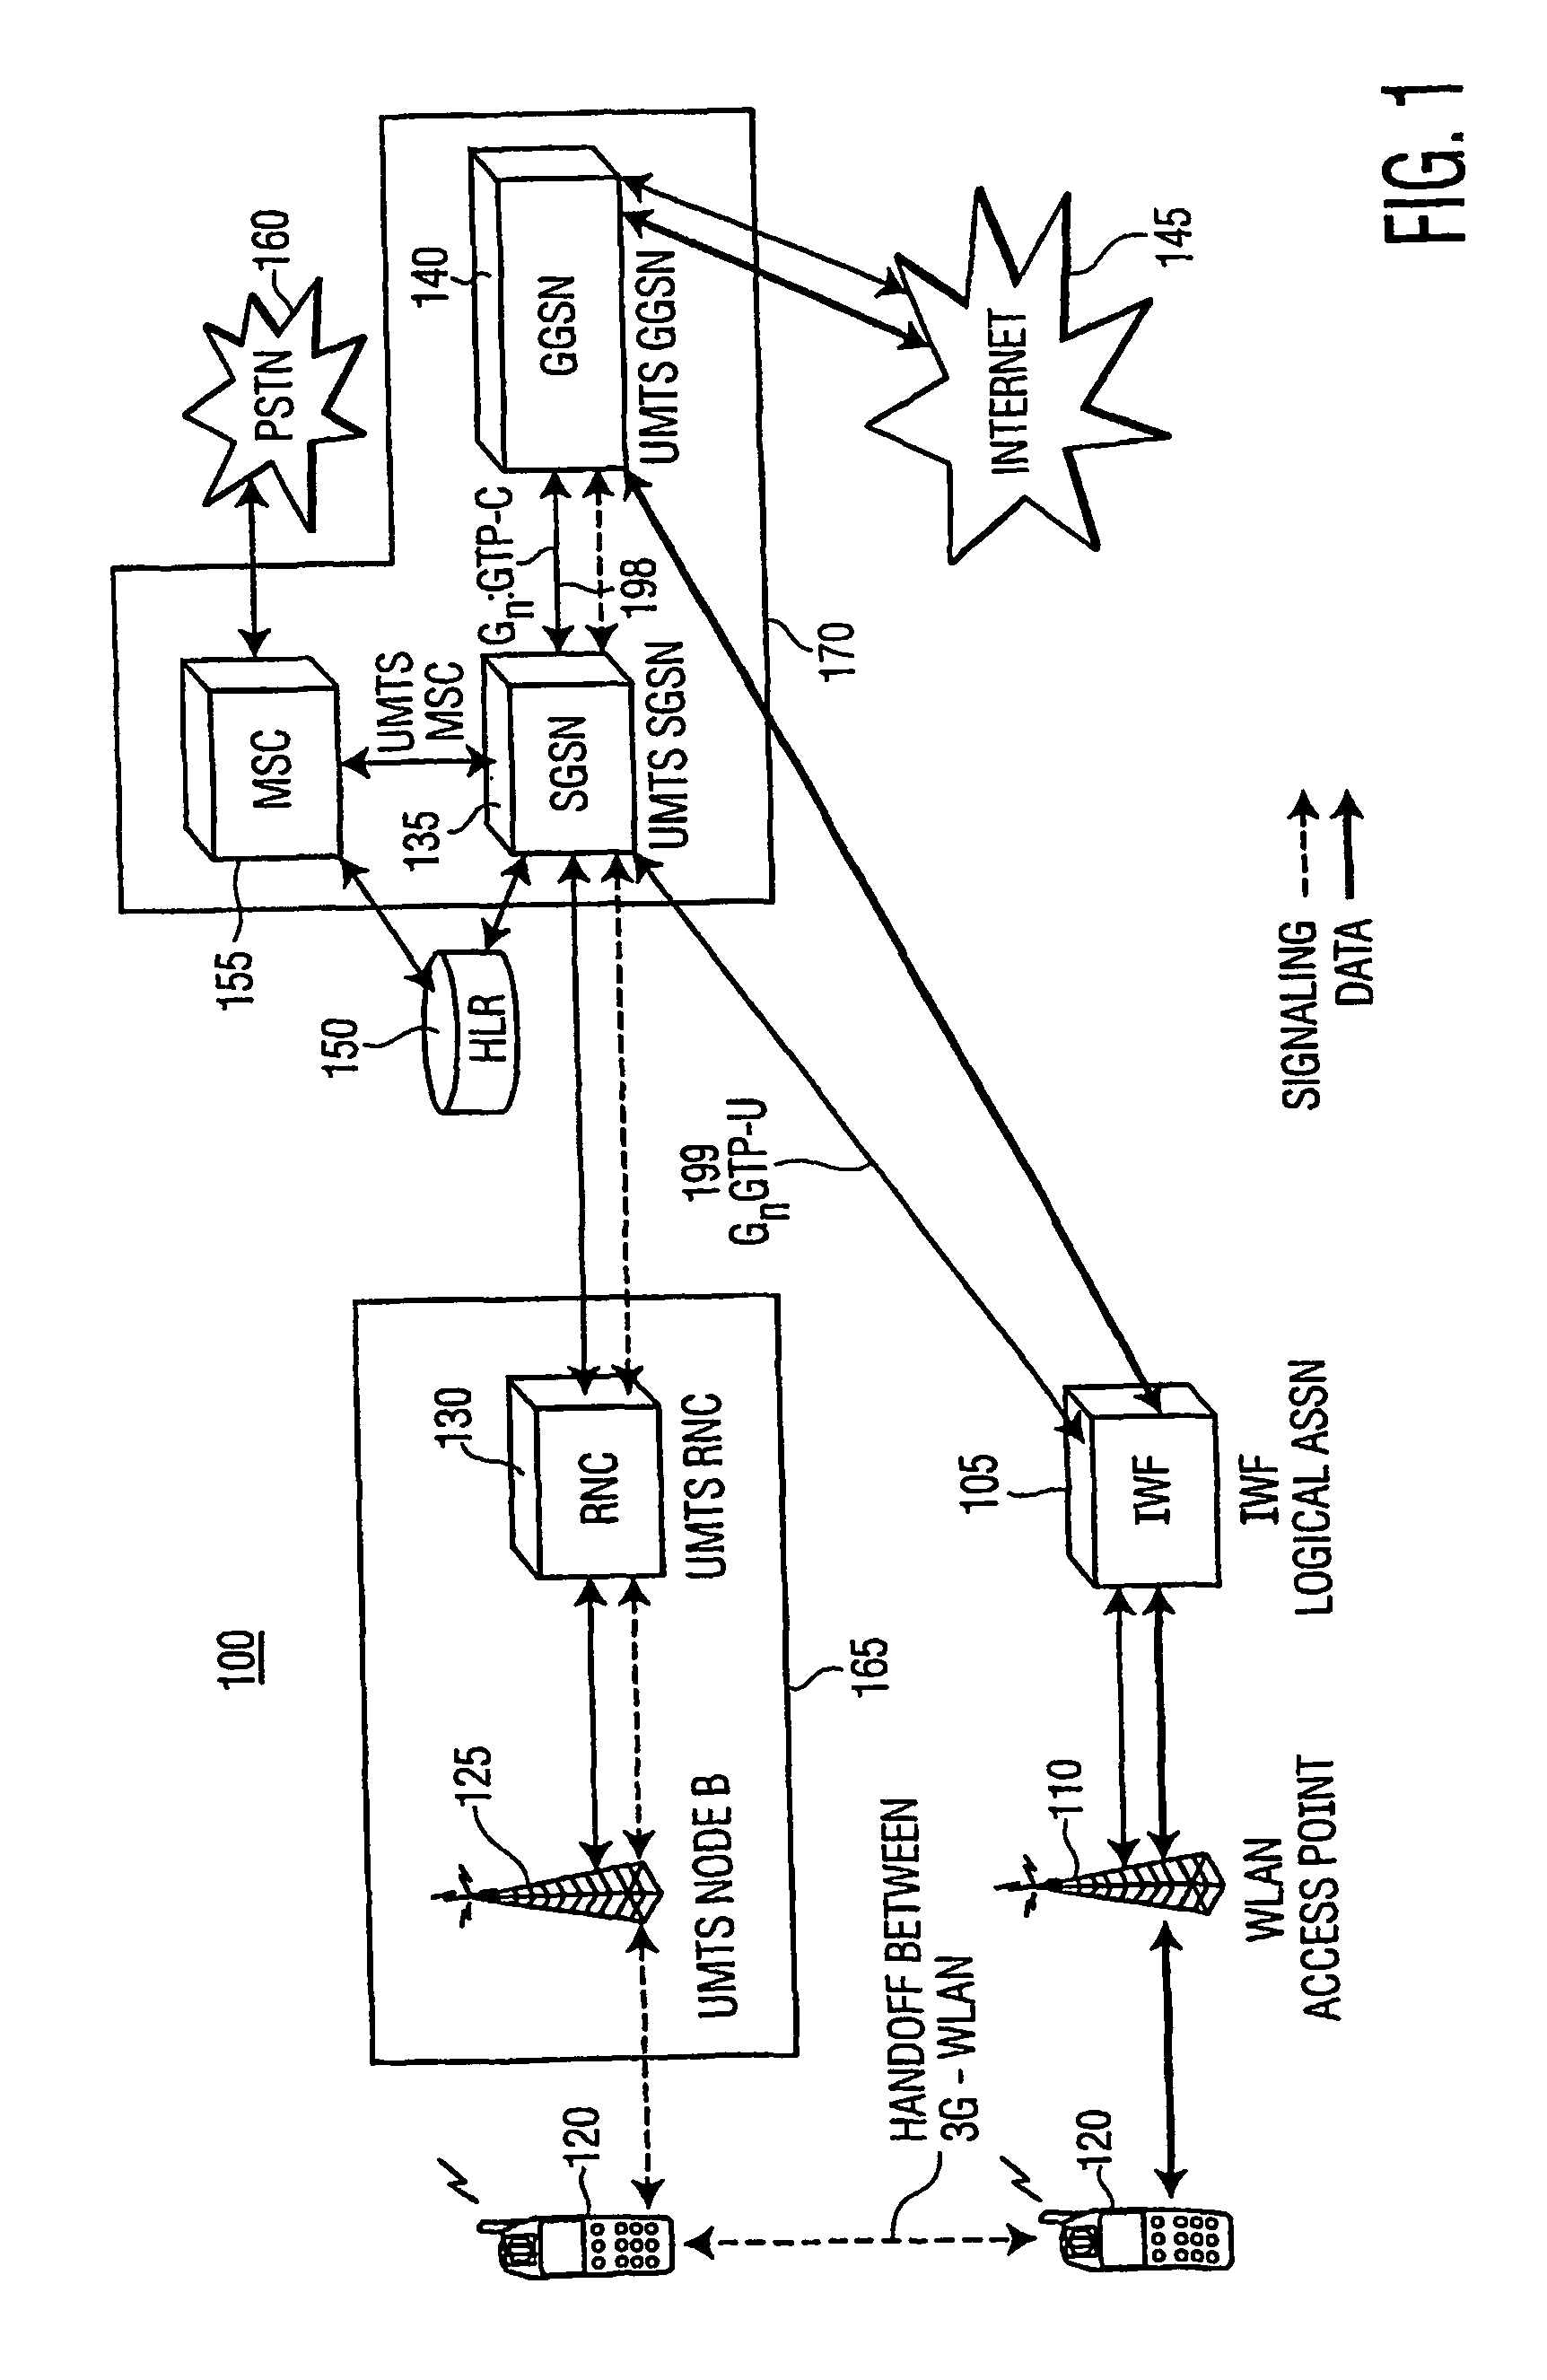 Internetworking between WLAN and a mobile communications system